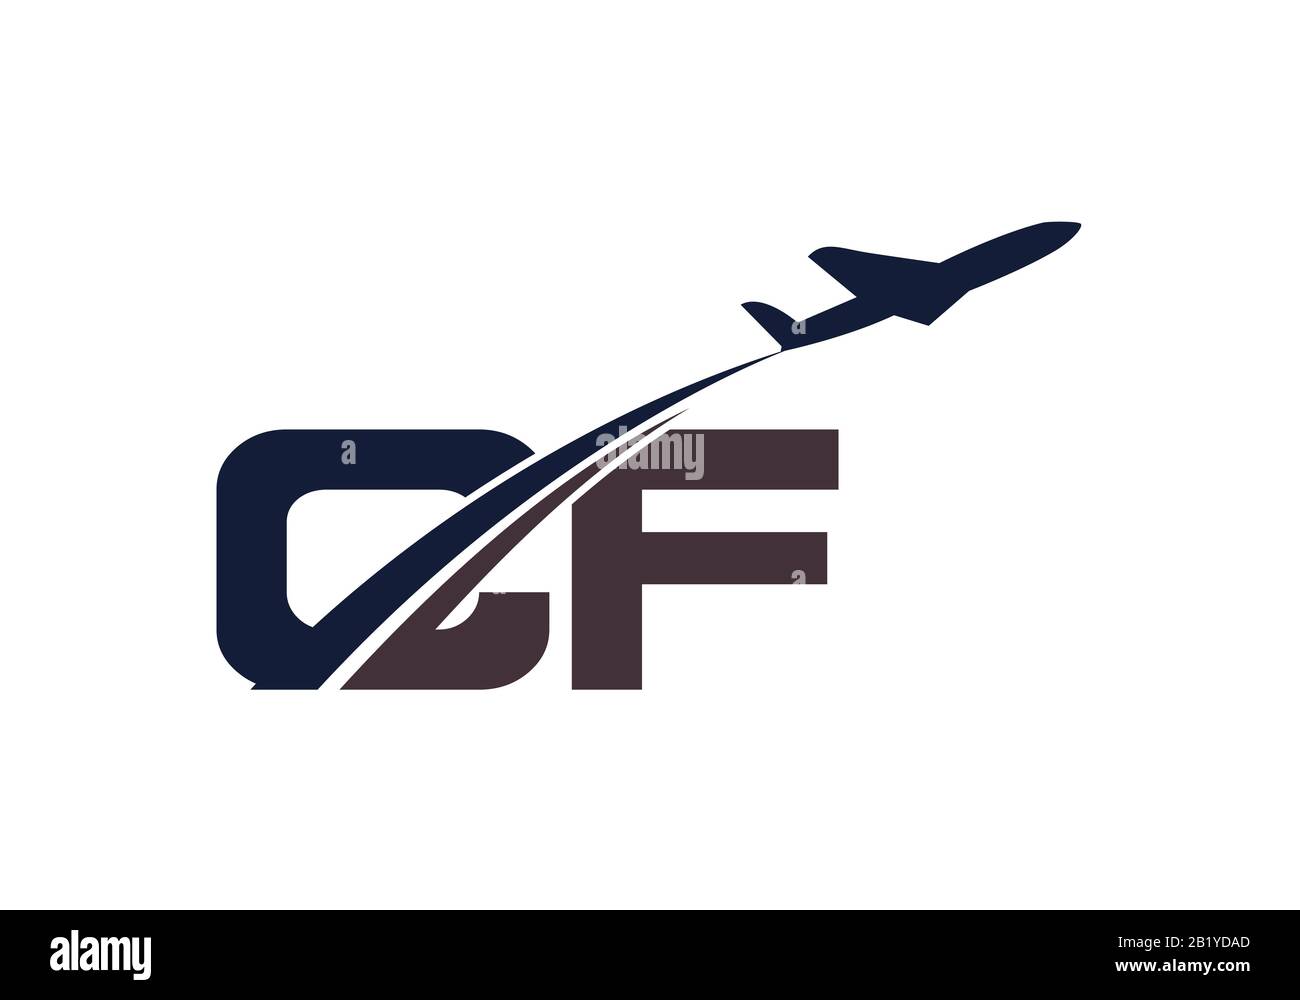 Initial Letter C and F  with Aviation Logo Design, Air, Airline, Airplane and Travel Logo template. Stock Vector